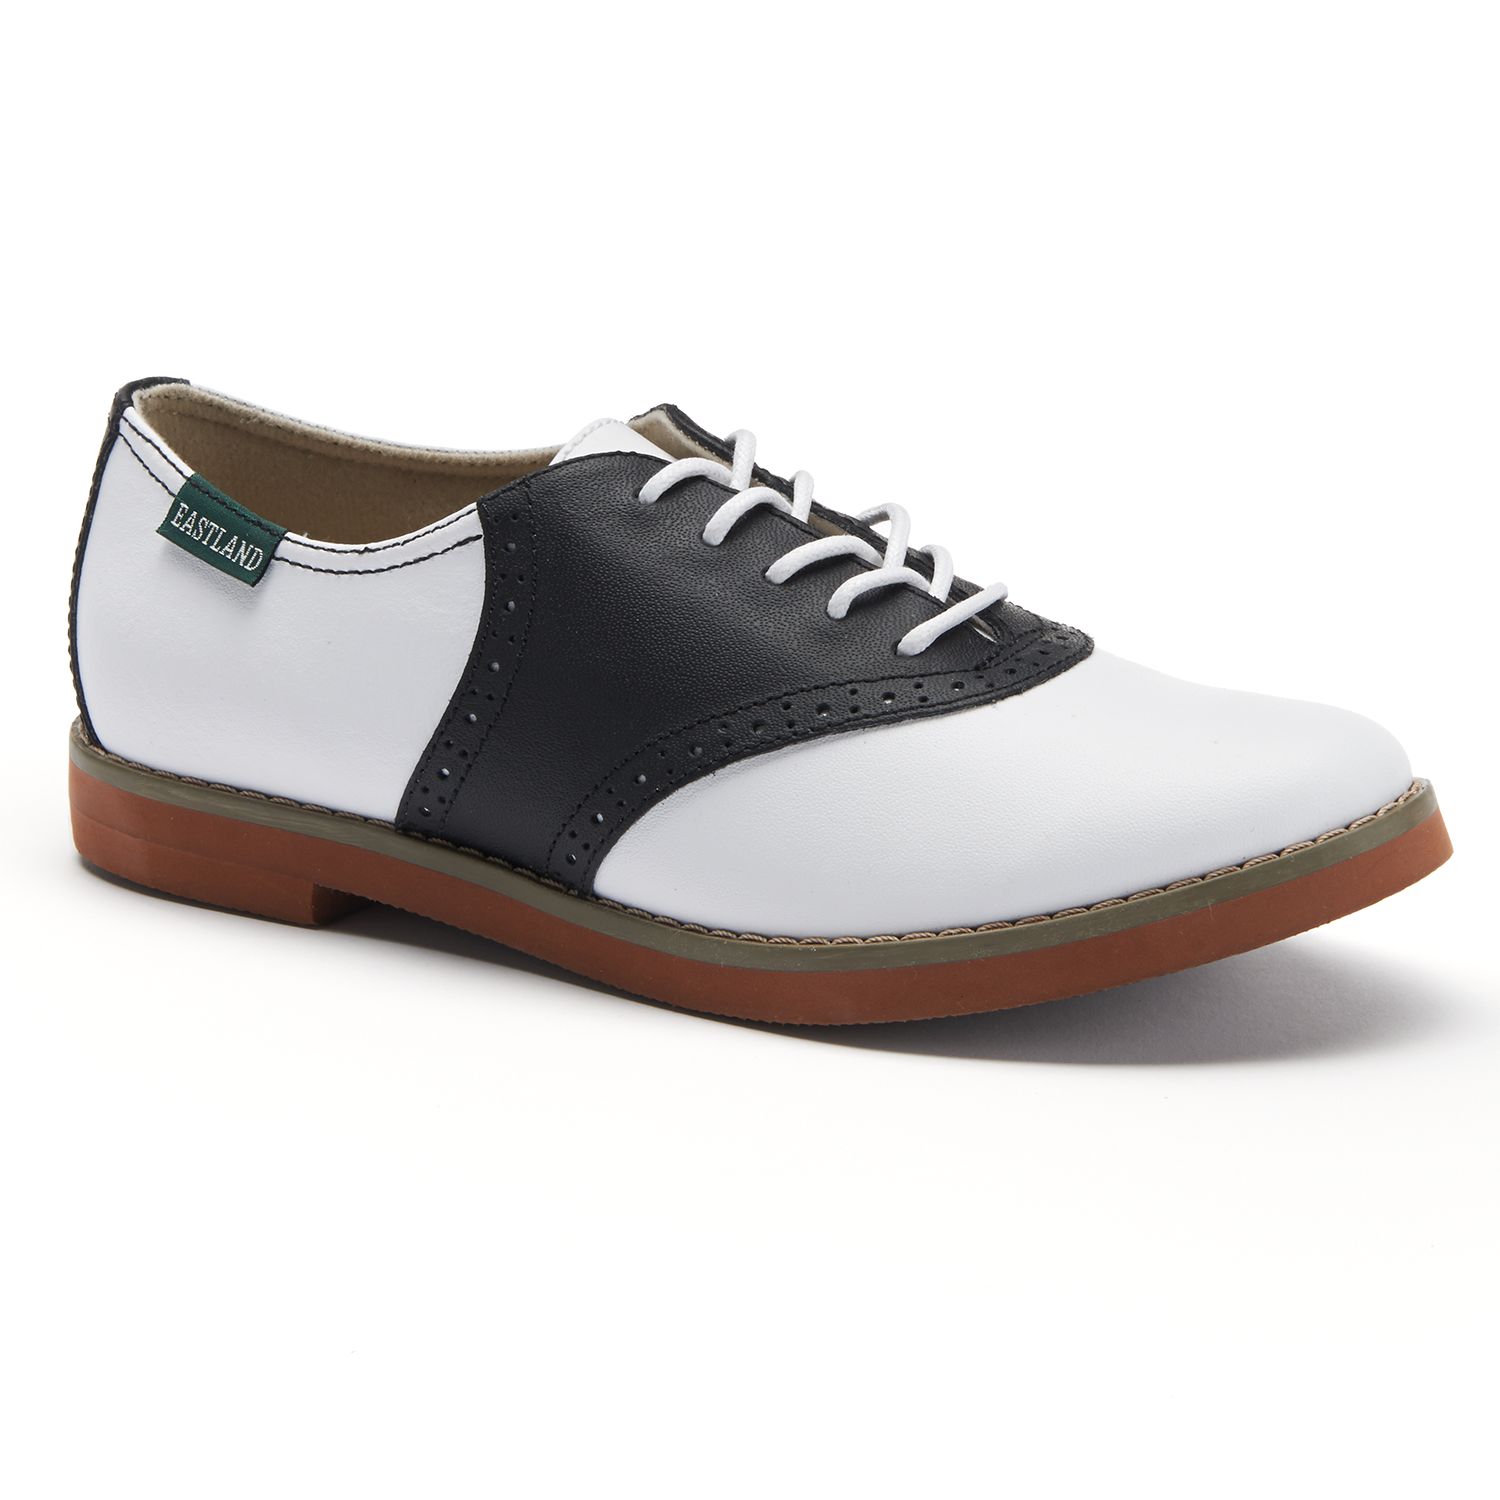 white oxford shoes womens